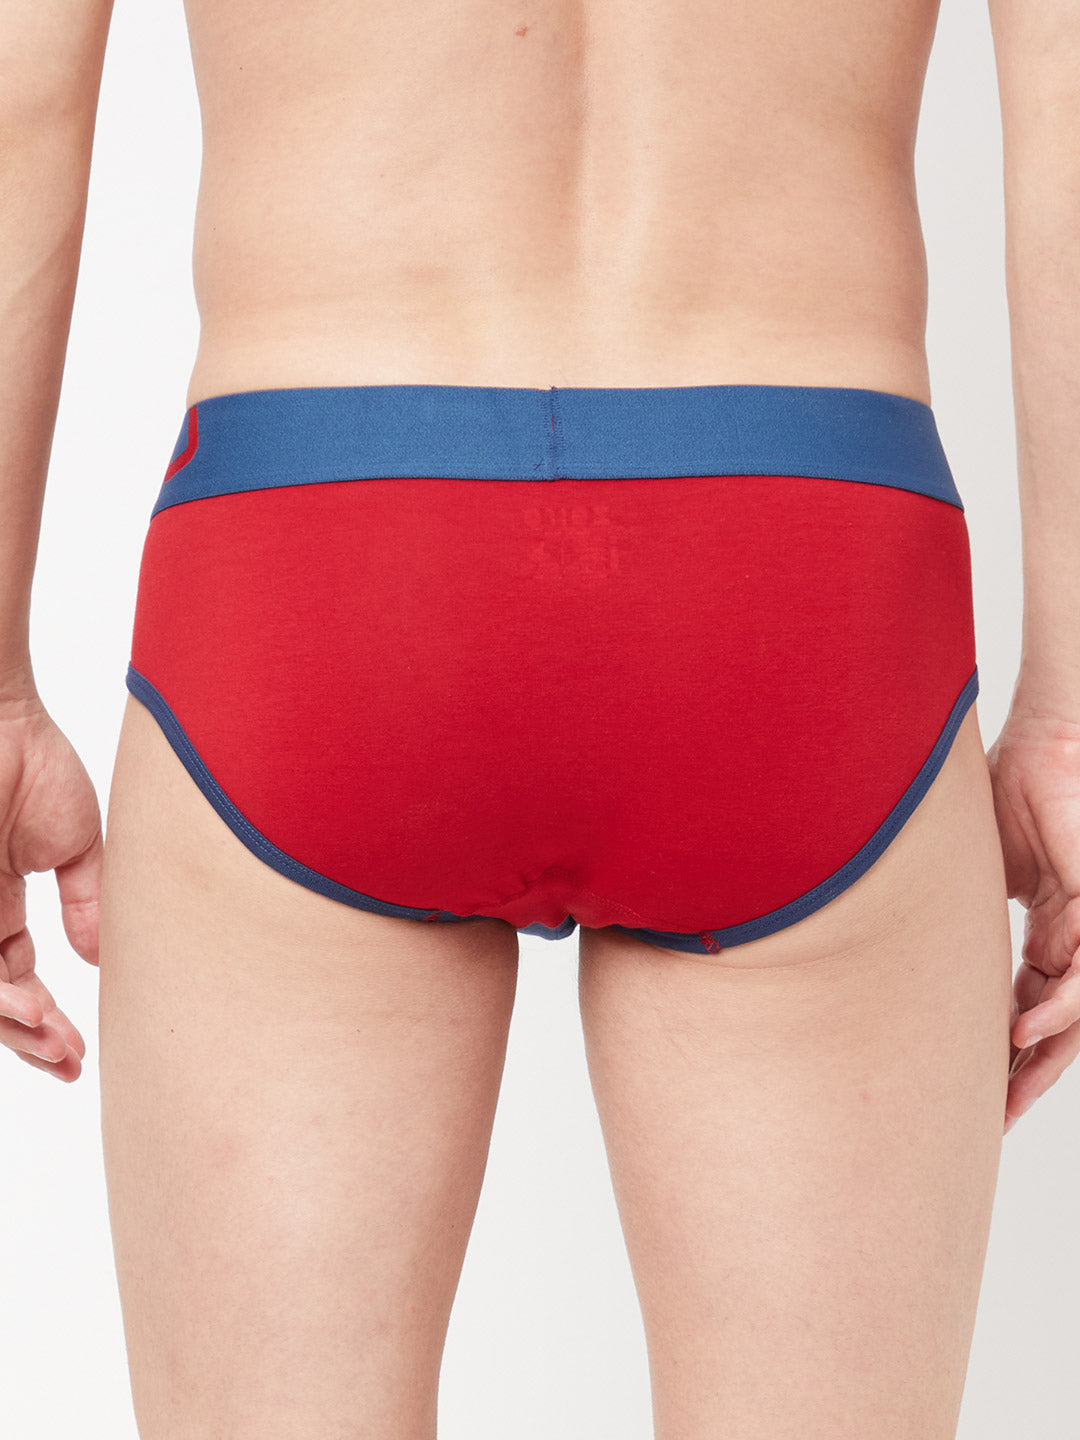 Zoiro Men&#39;s Cotton Trend Brief (Pack of 2) Legion Blue/Ribbon Red + Directory Blue/ Total Eclipse